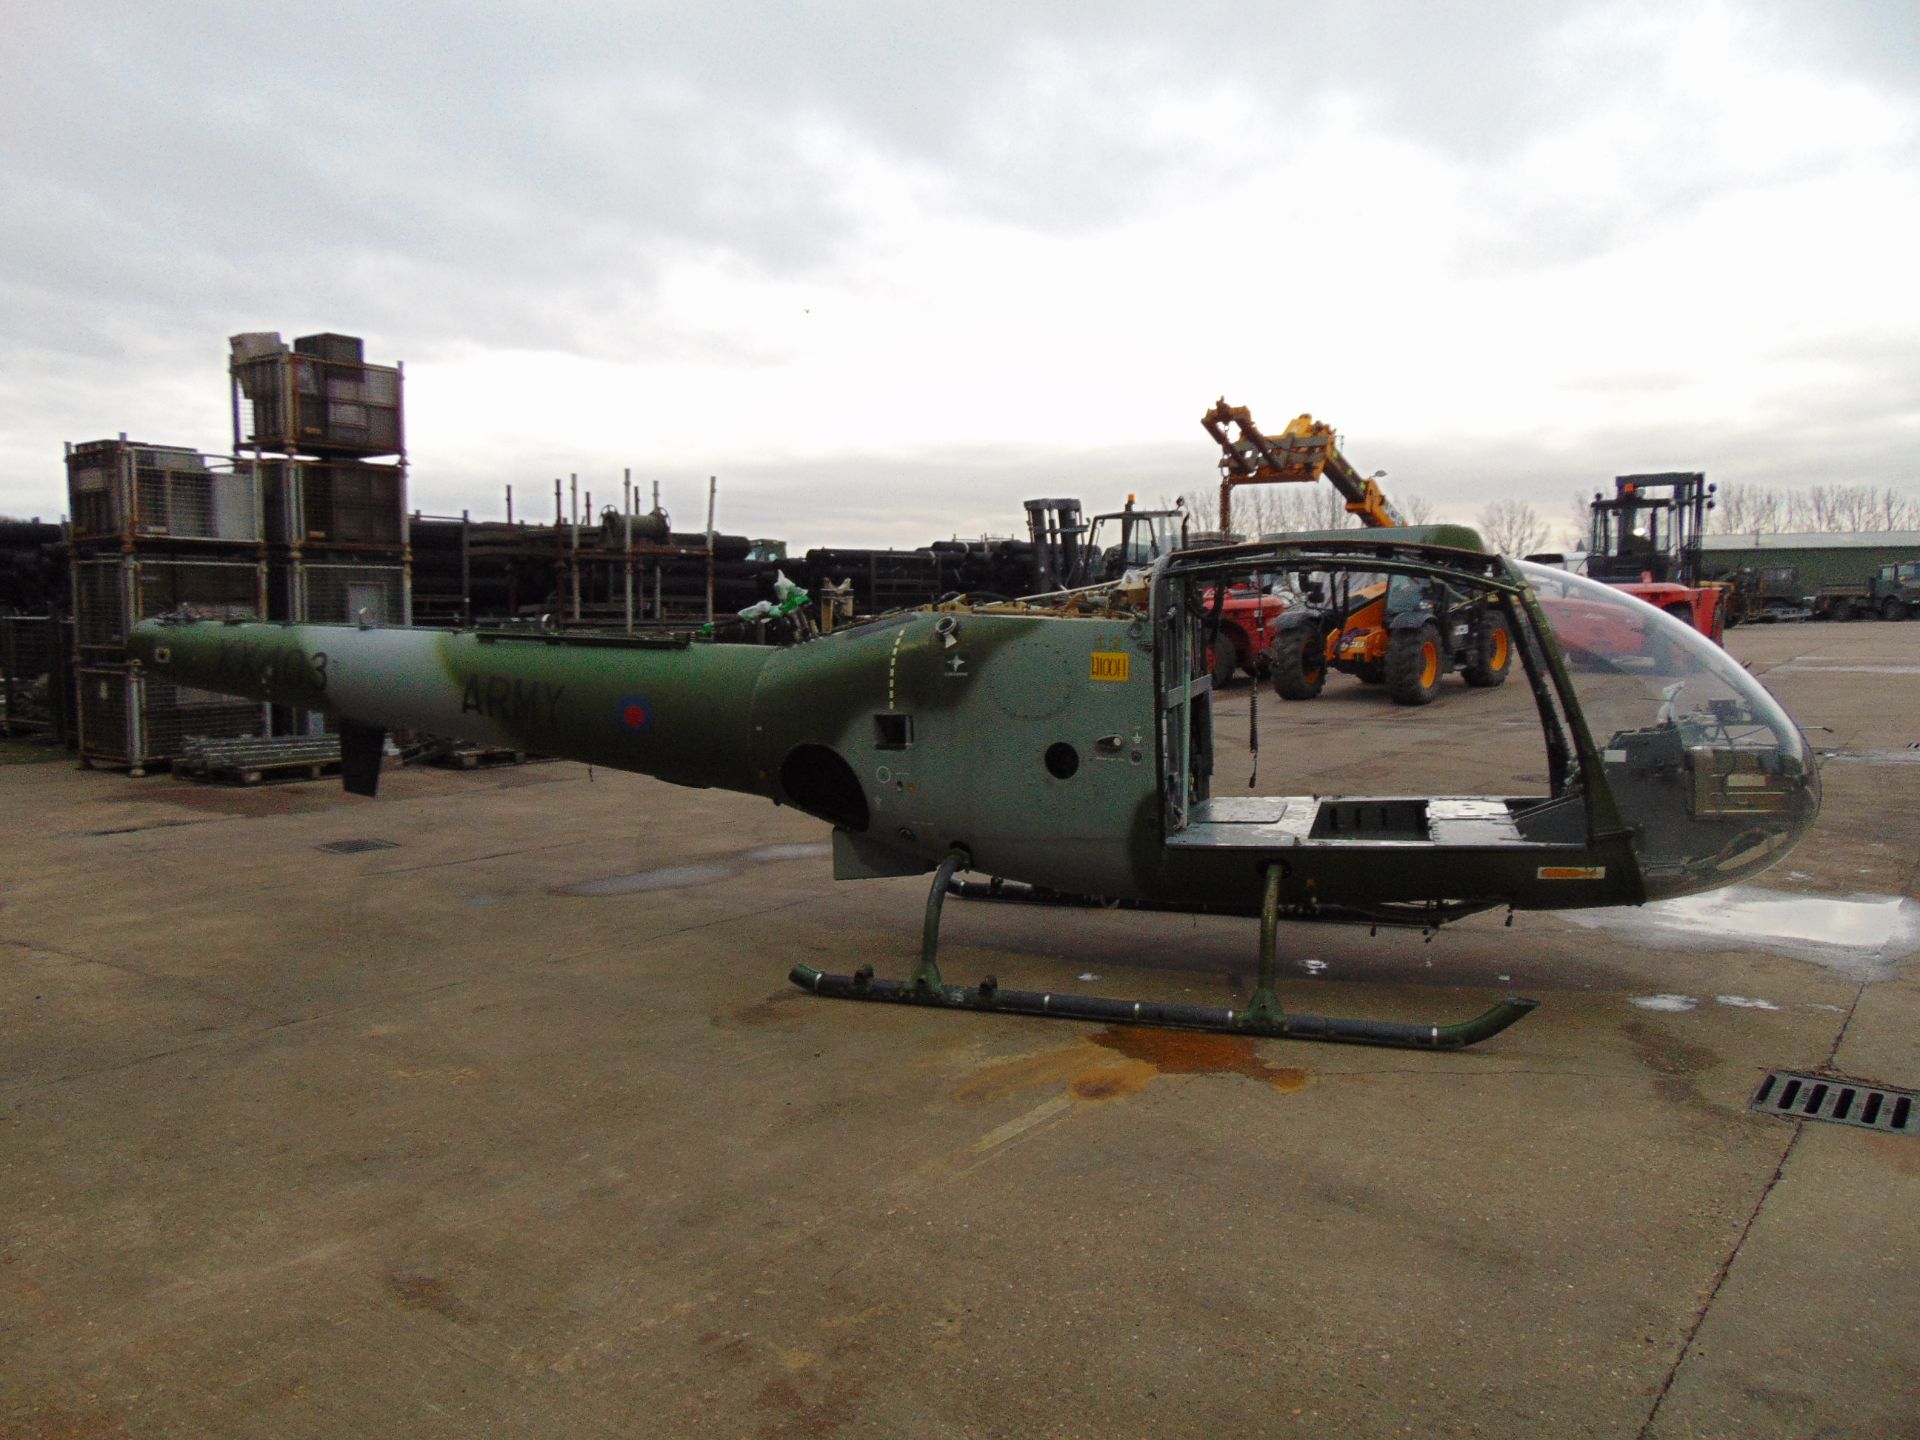 Gazelle AH 1 Turbine Helicopter Airframe (TAIL NUMBER XX403) - Image 6 of 28